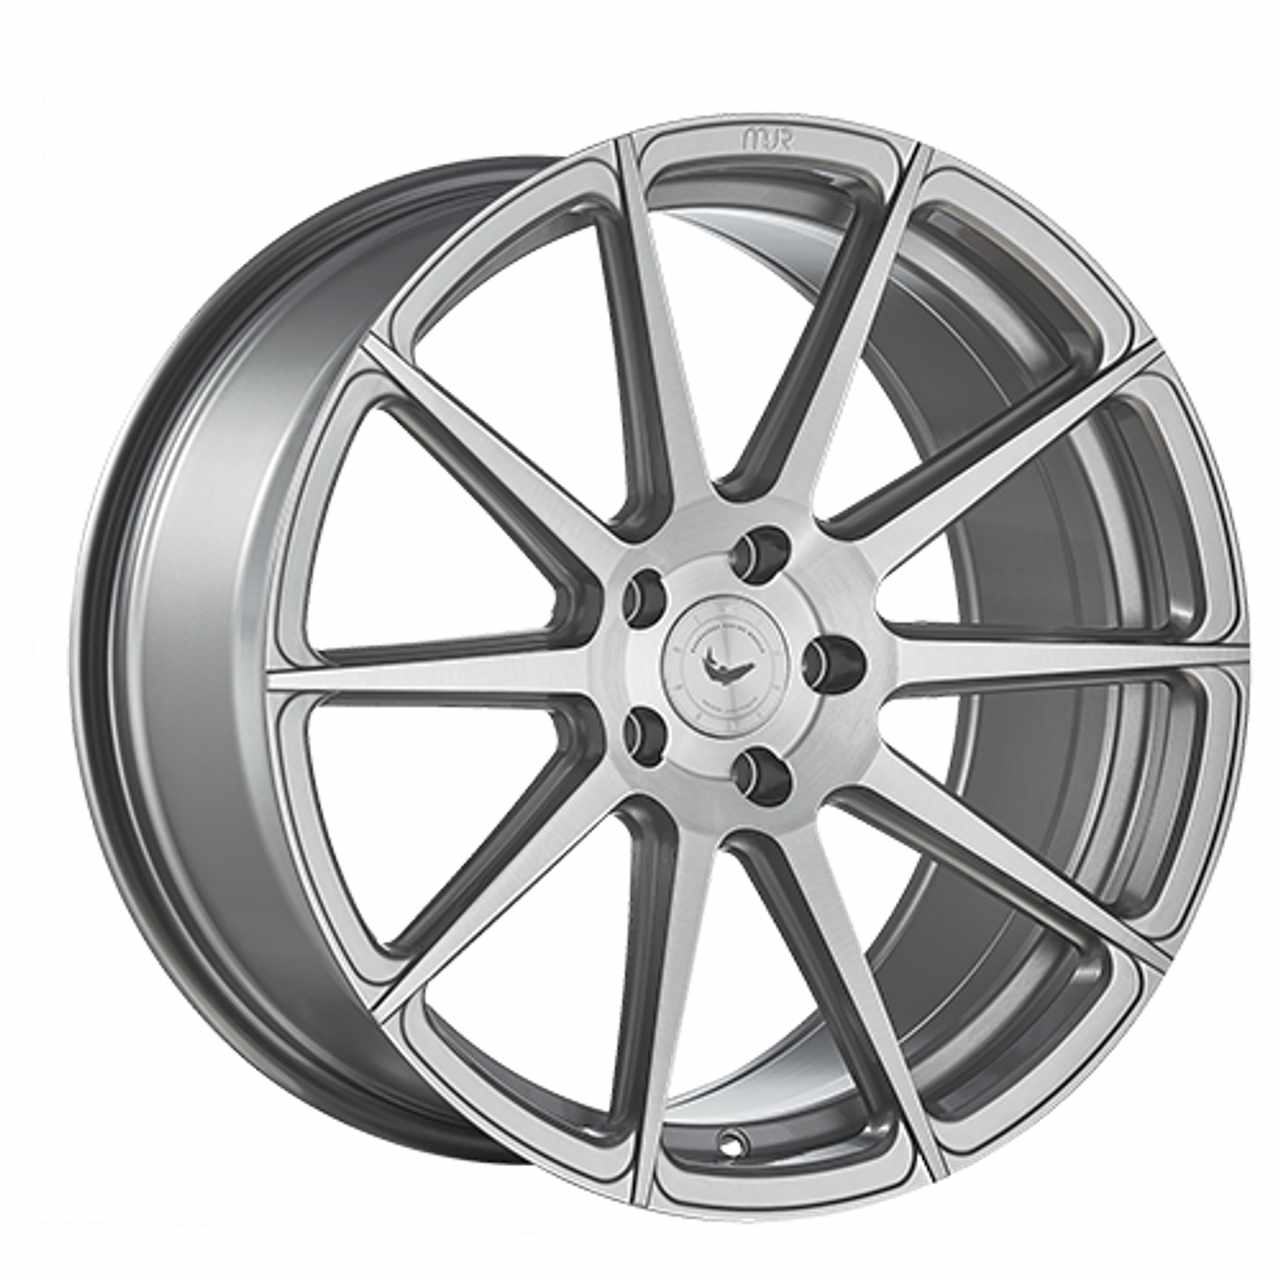 BARRACUDA PROJECT 2.0 silver brushed 9.0Jx21 5x108 ET40